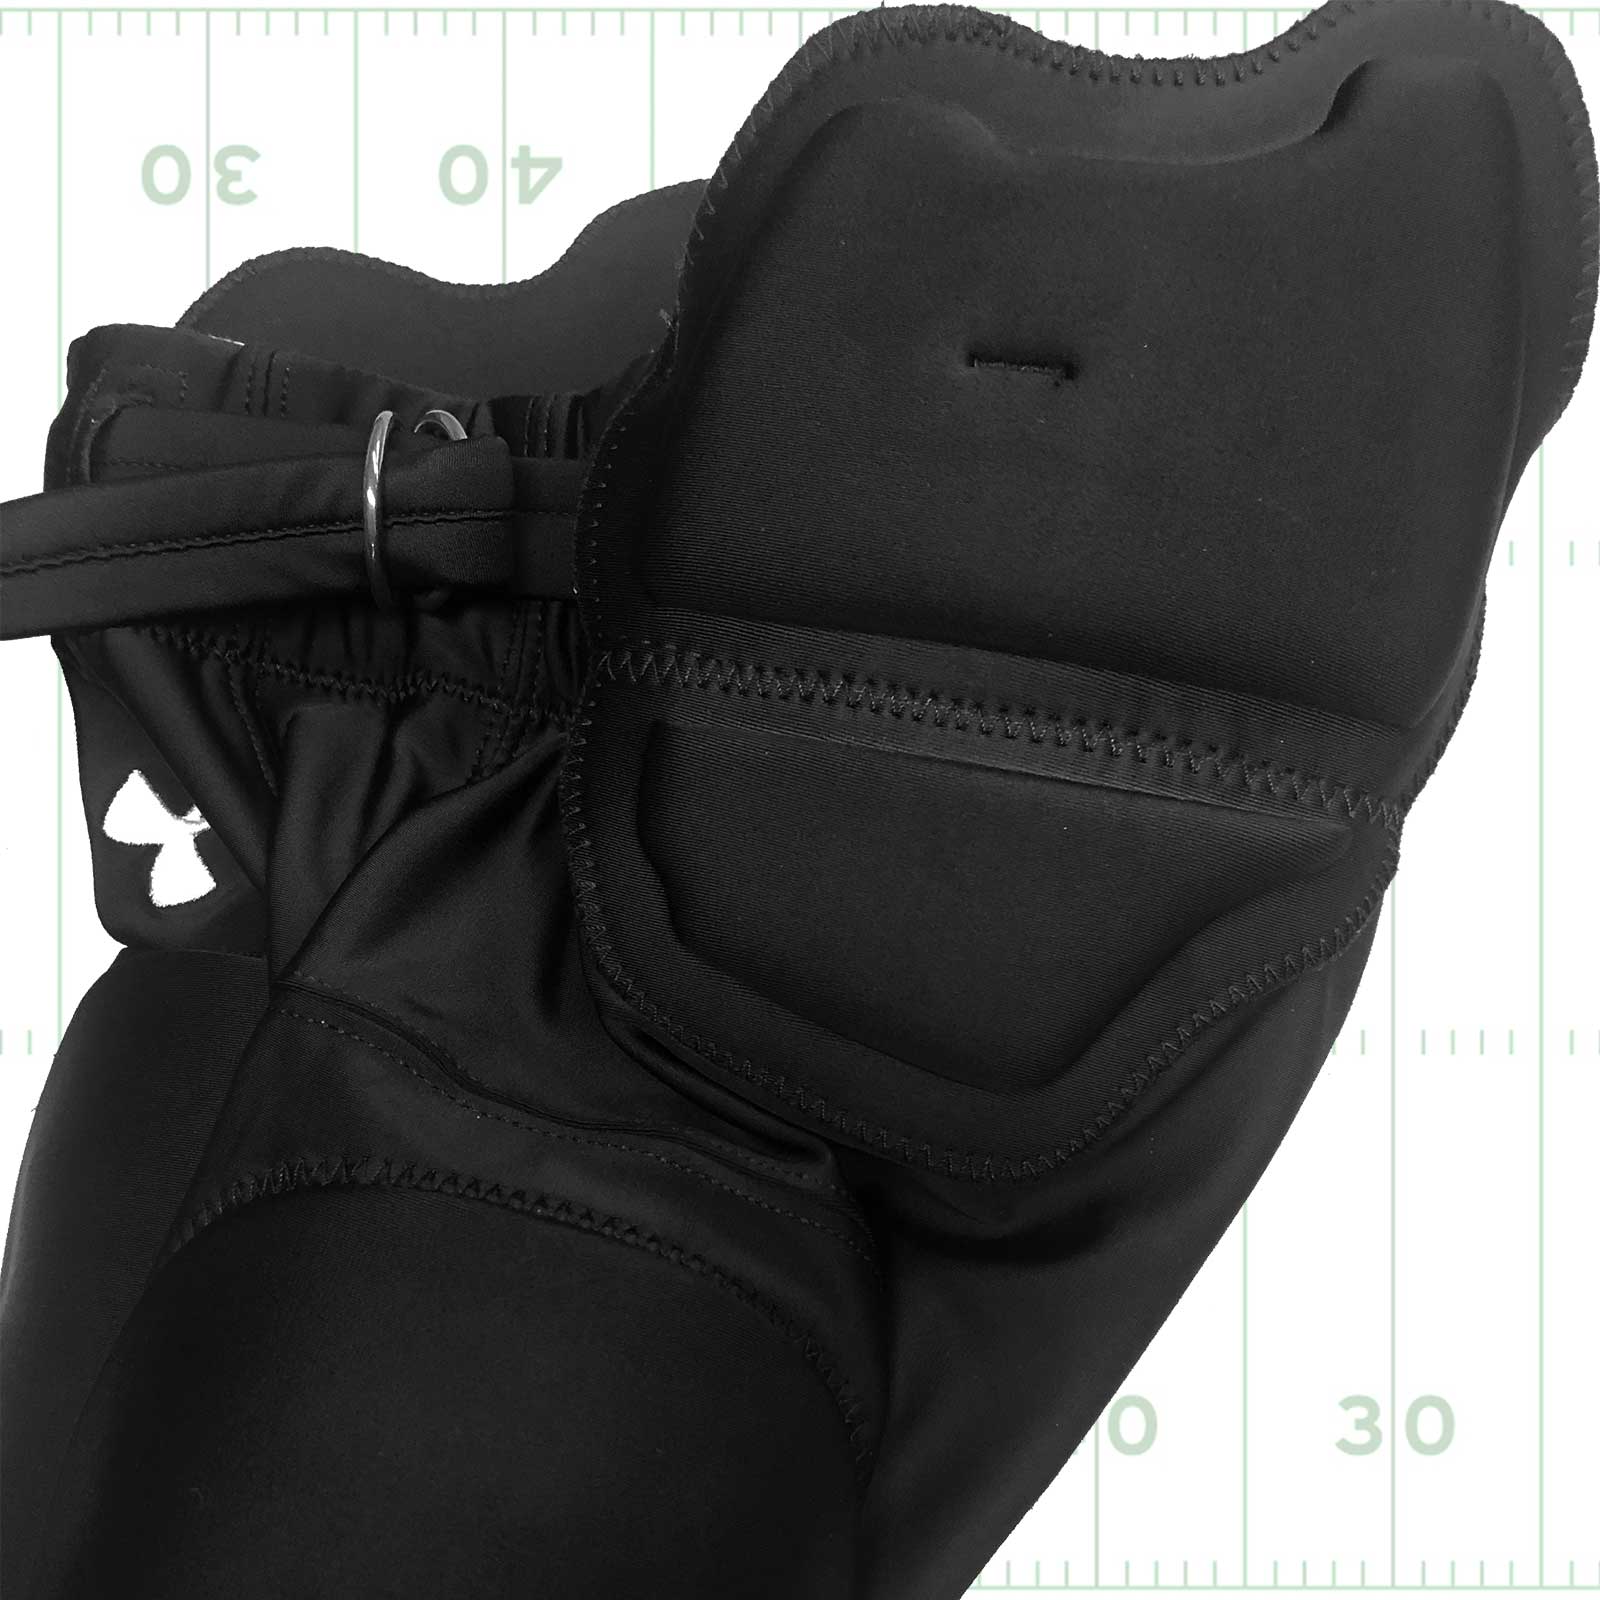 Under Armour Integrated Youth Football Pants - Hip Pads